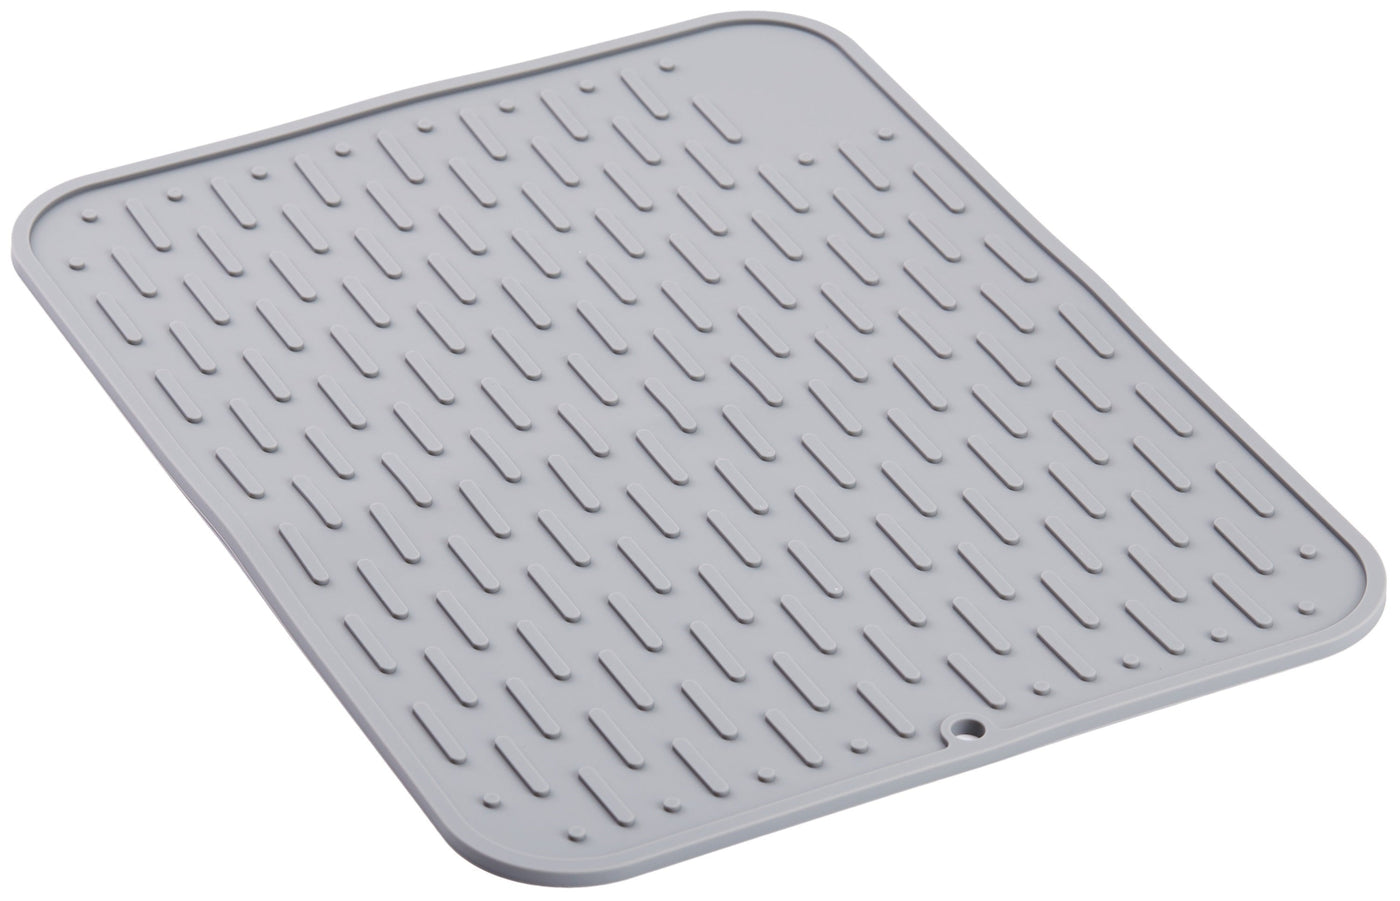 Custom Silicone Drying Mat, Trivet for Kitchen Counter